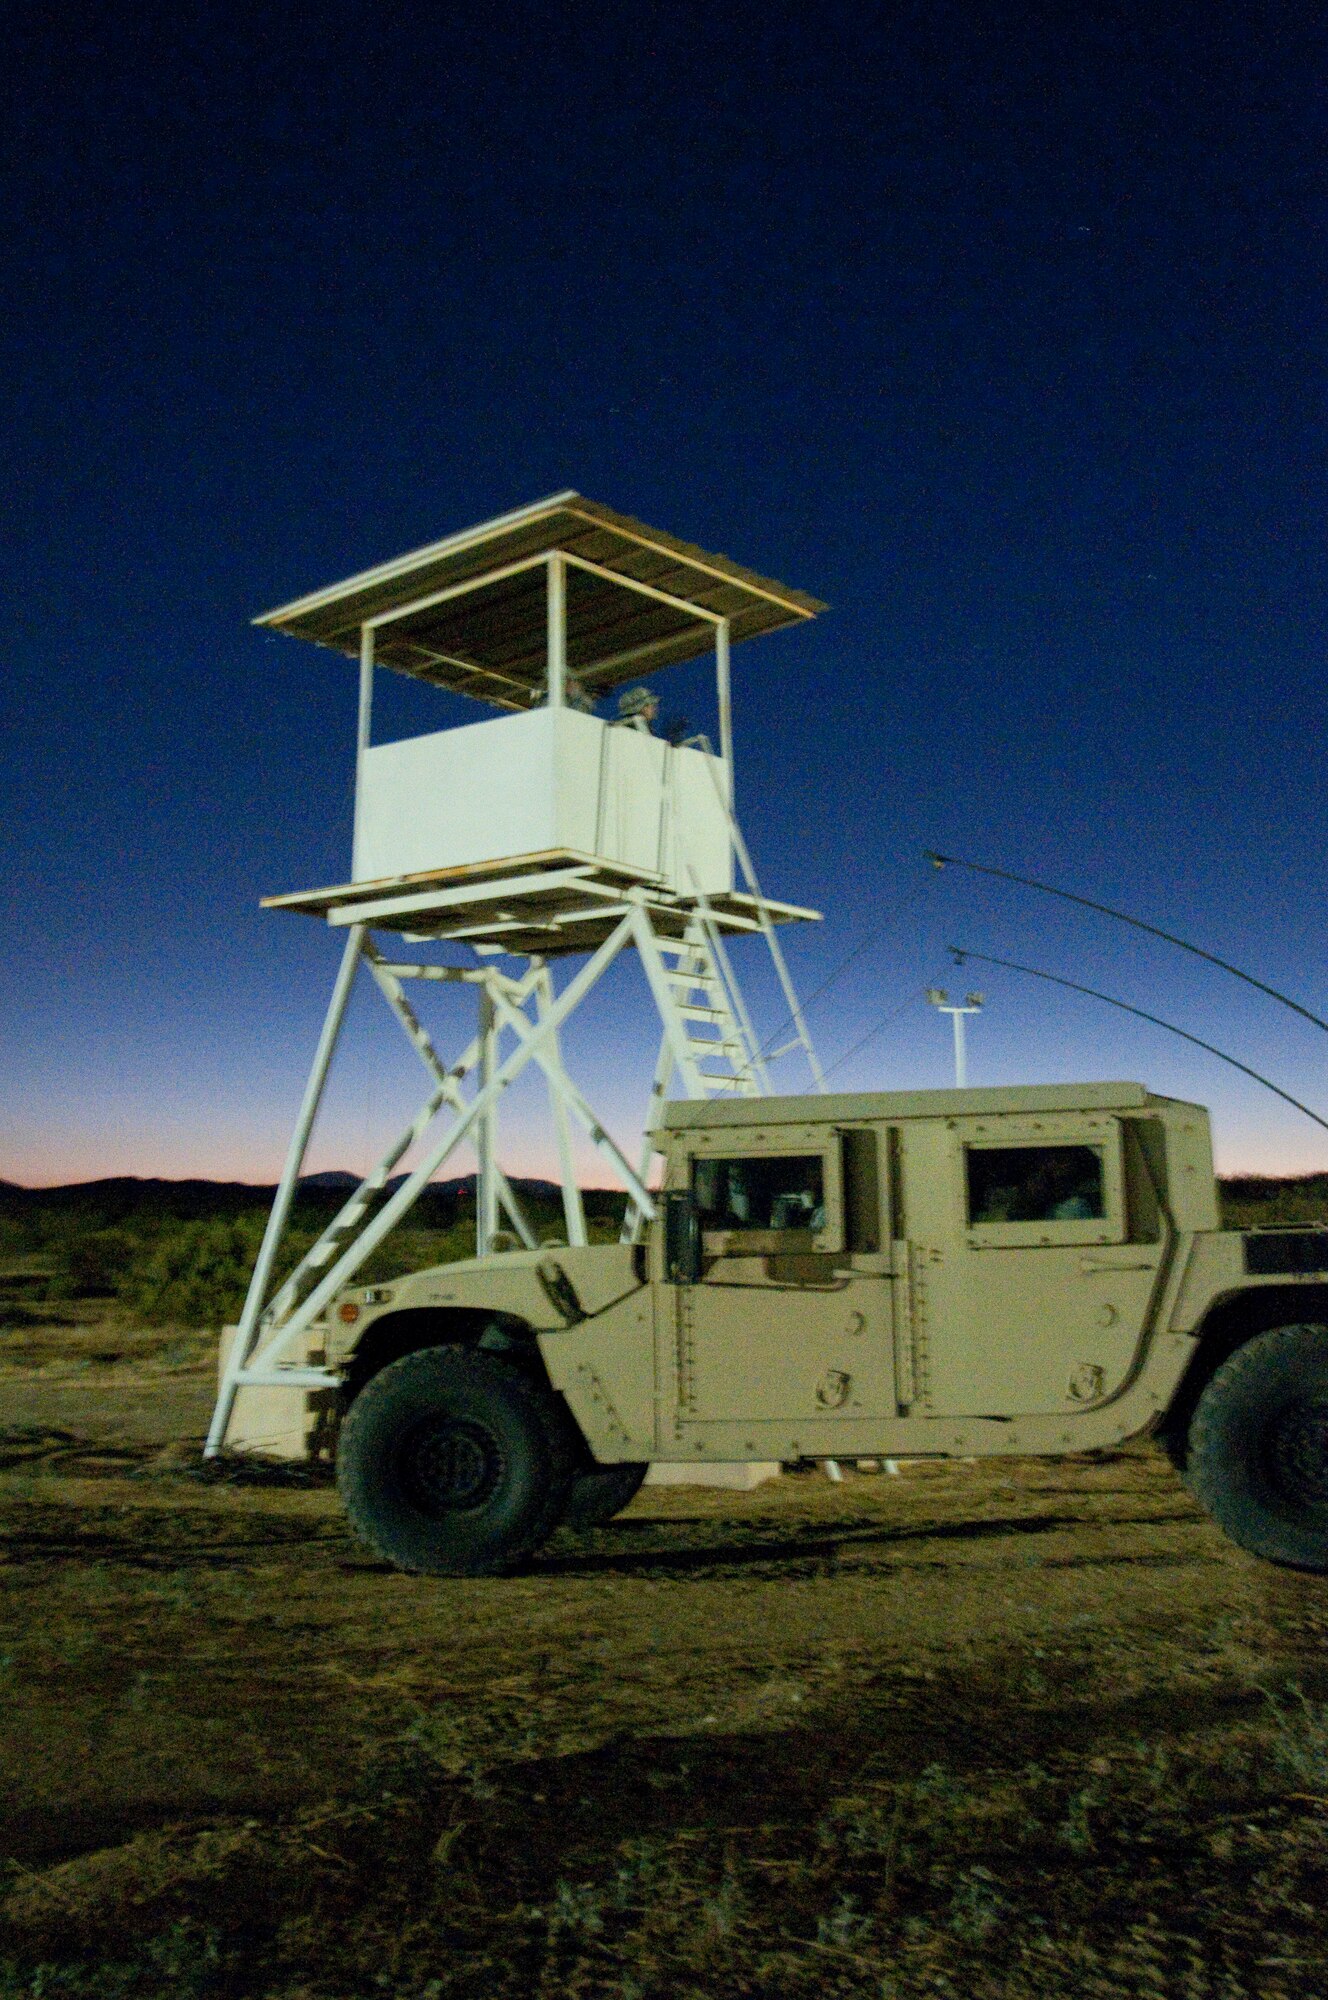 Members of the 144th Security Forces Squadron stand guard in a observation tower while taking part in a field training exercise at Camp Corum, Edwards Air Force Base, Calif. on Aug 4, 2011.  The Security Forces Squadron exercised at a training site deep into the Mojave Desert for the five day engagement which focused on night operations. (U.S. Air Force photo by MSgt. David J. Loeffler)